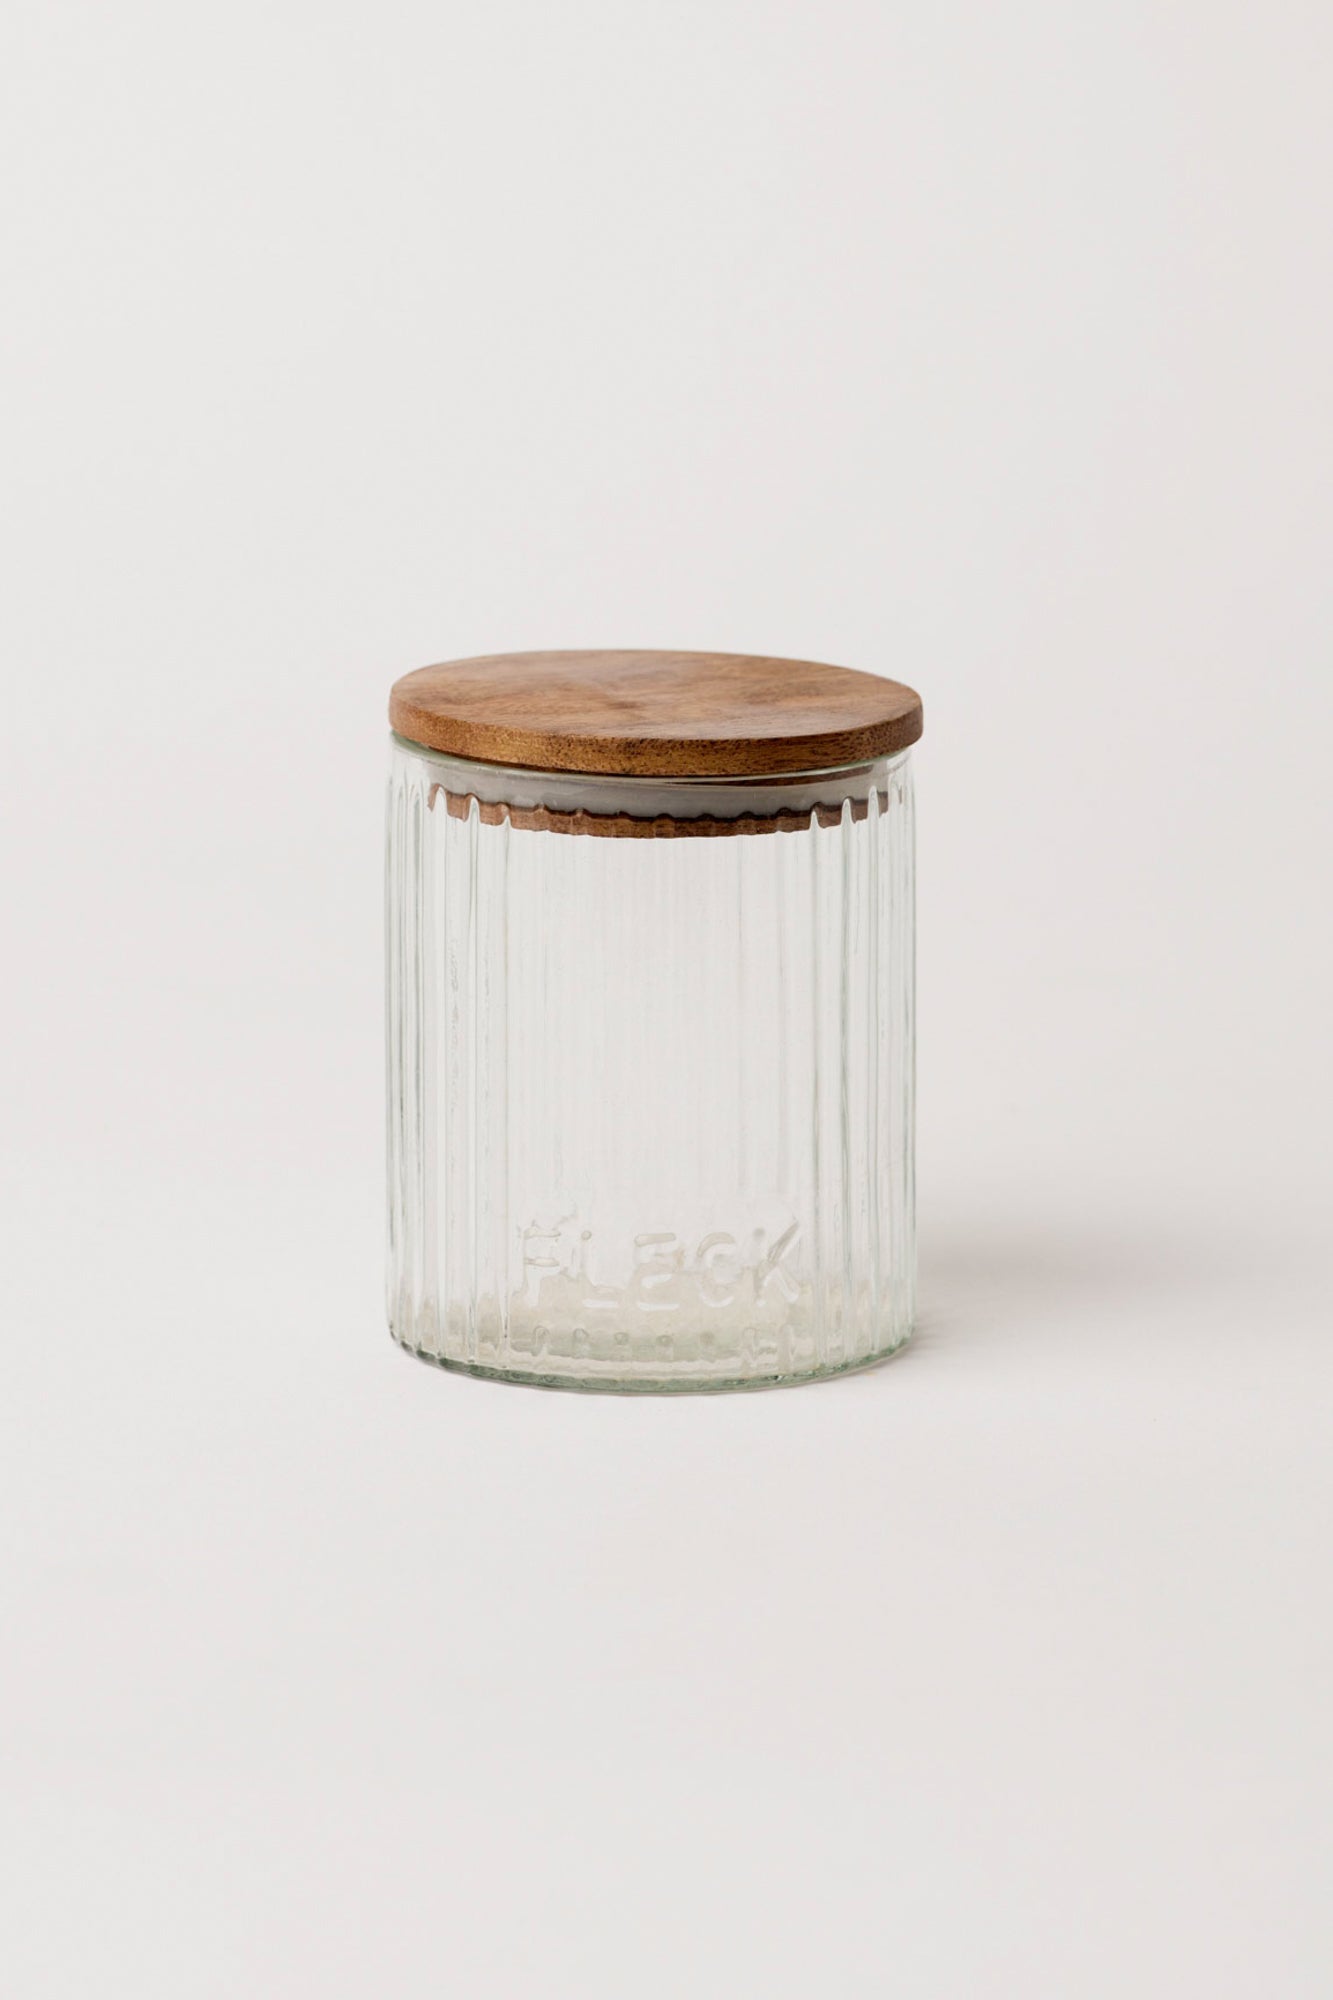 Sealable Glass jar with wooden lids